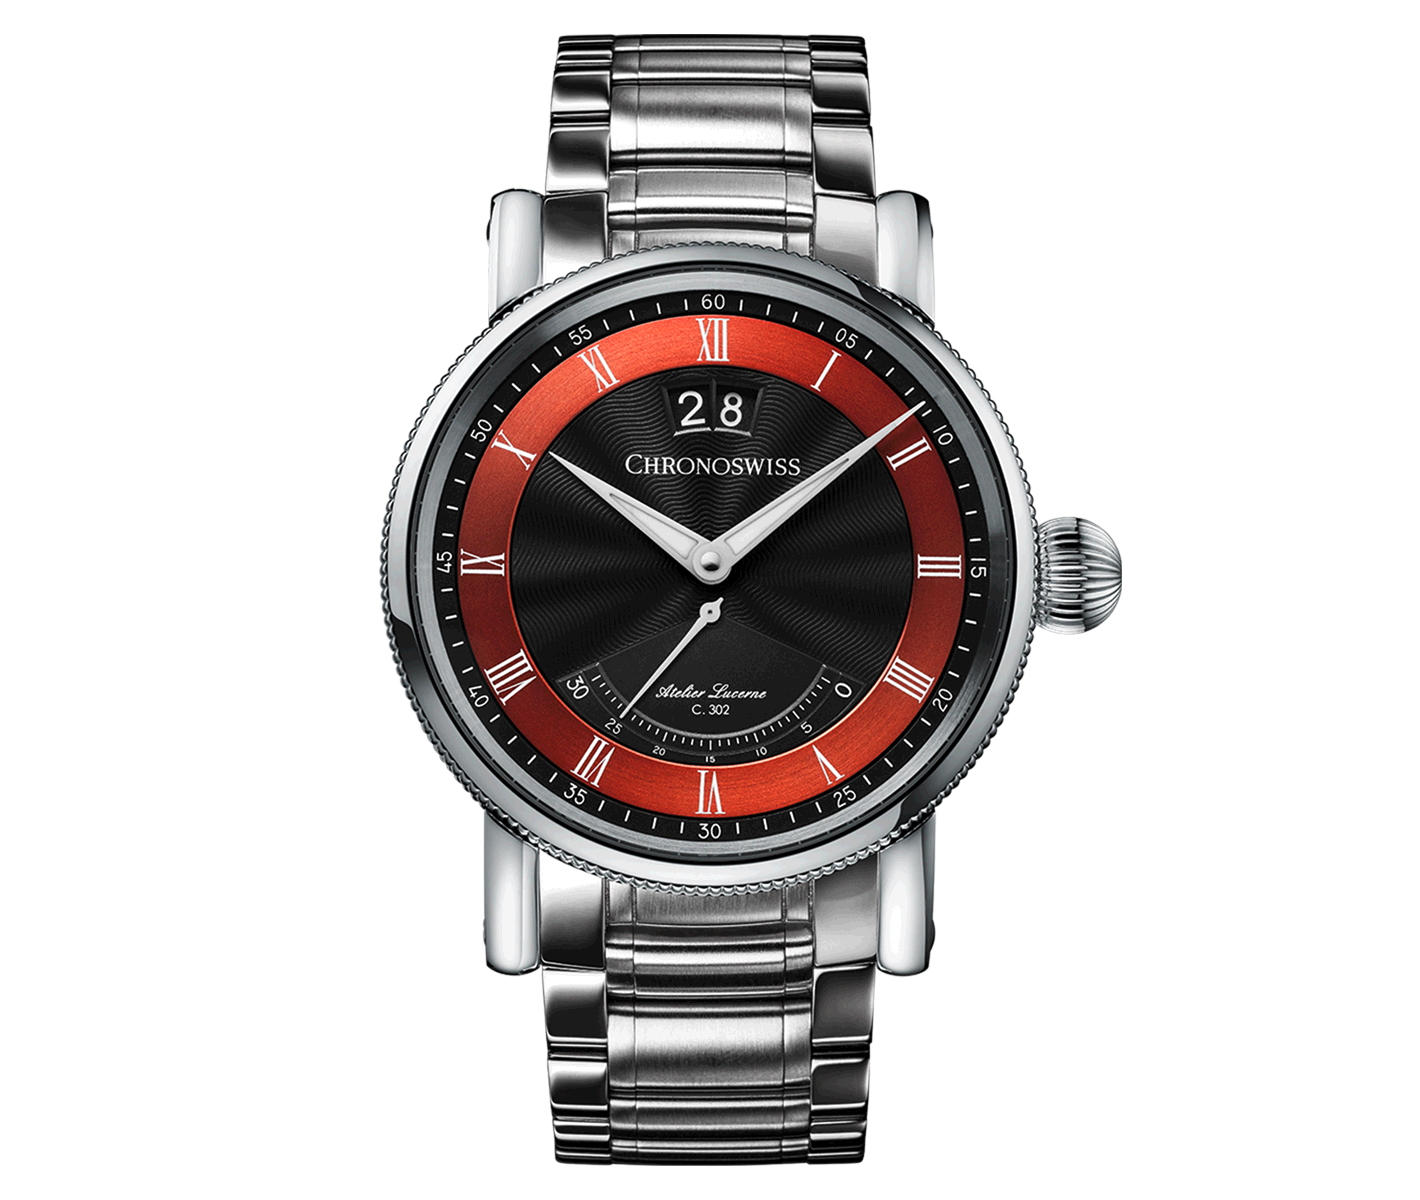 ReSec Classic - CH-8783-BKBR